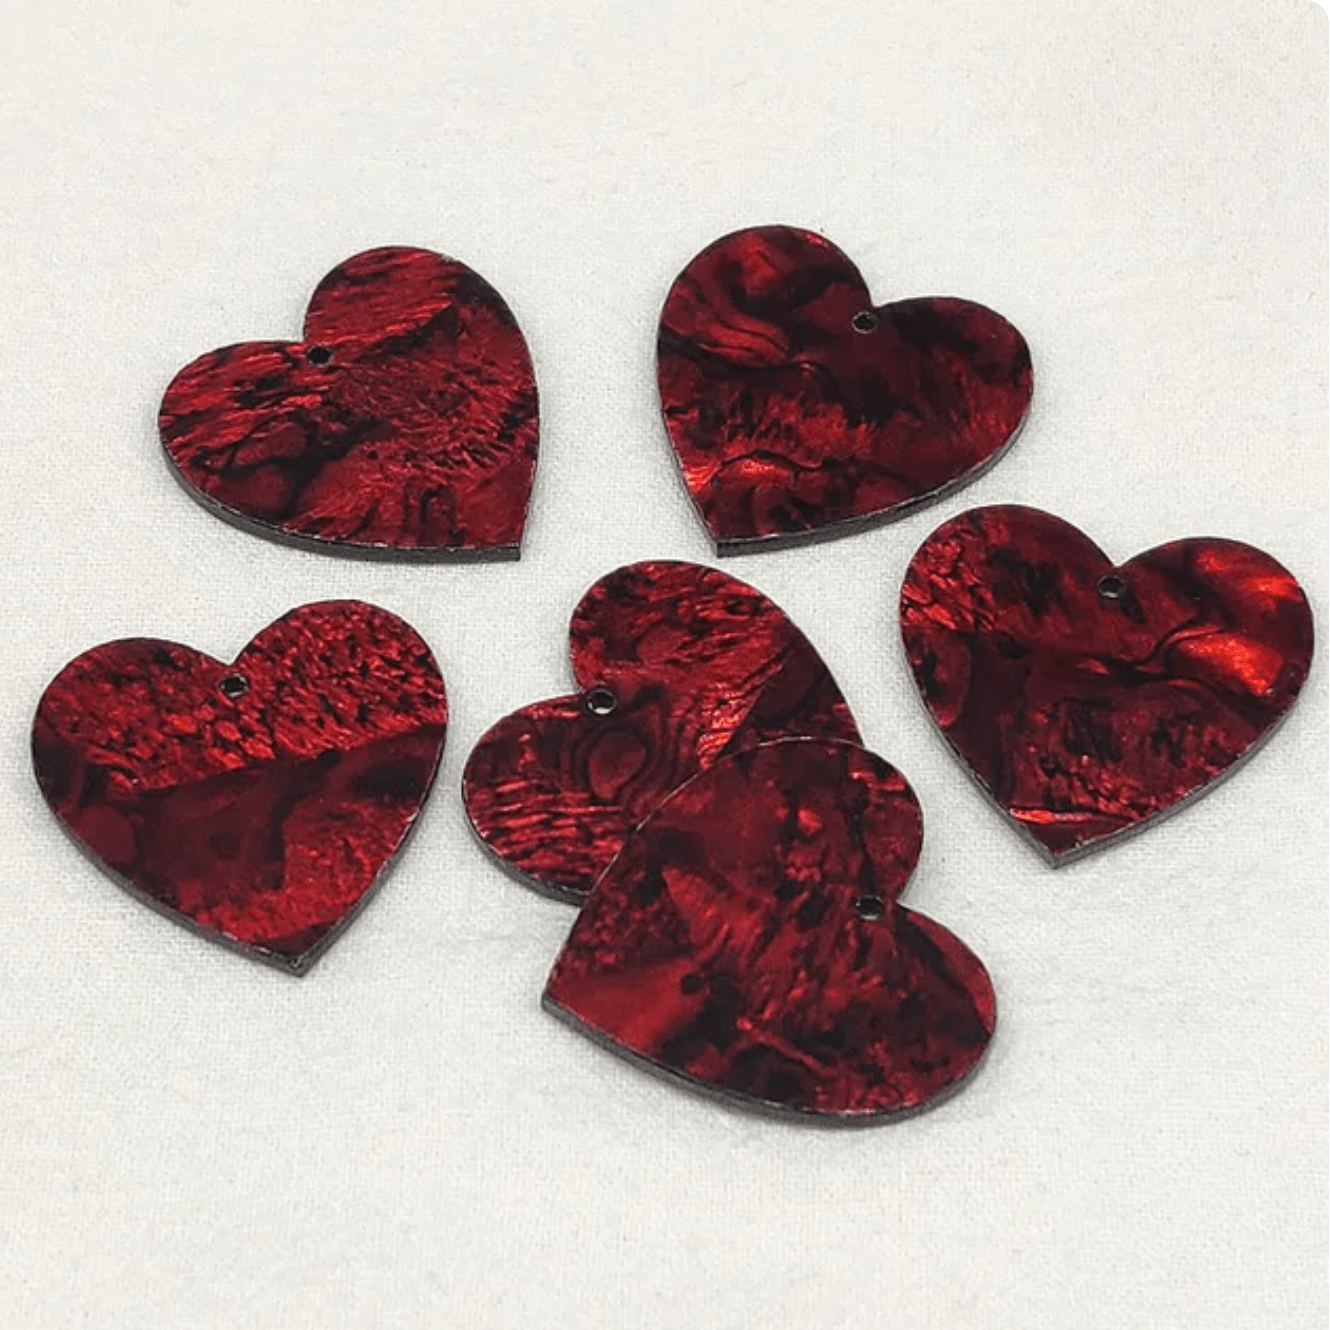 31*31mm Red Abalone Shell Large Heart shaped, with one hole, Resin Shell Gem (Sold in Pair) Resin Gems